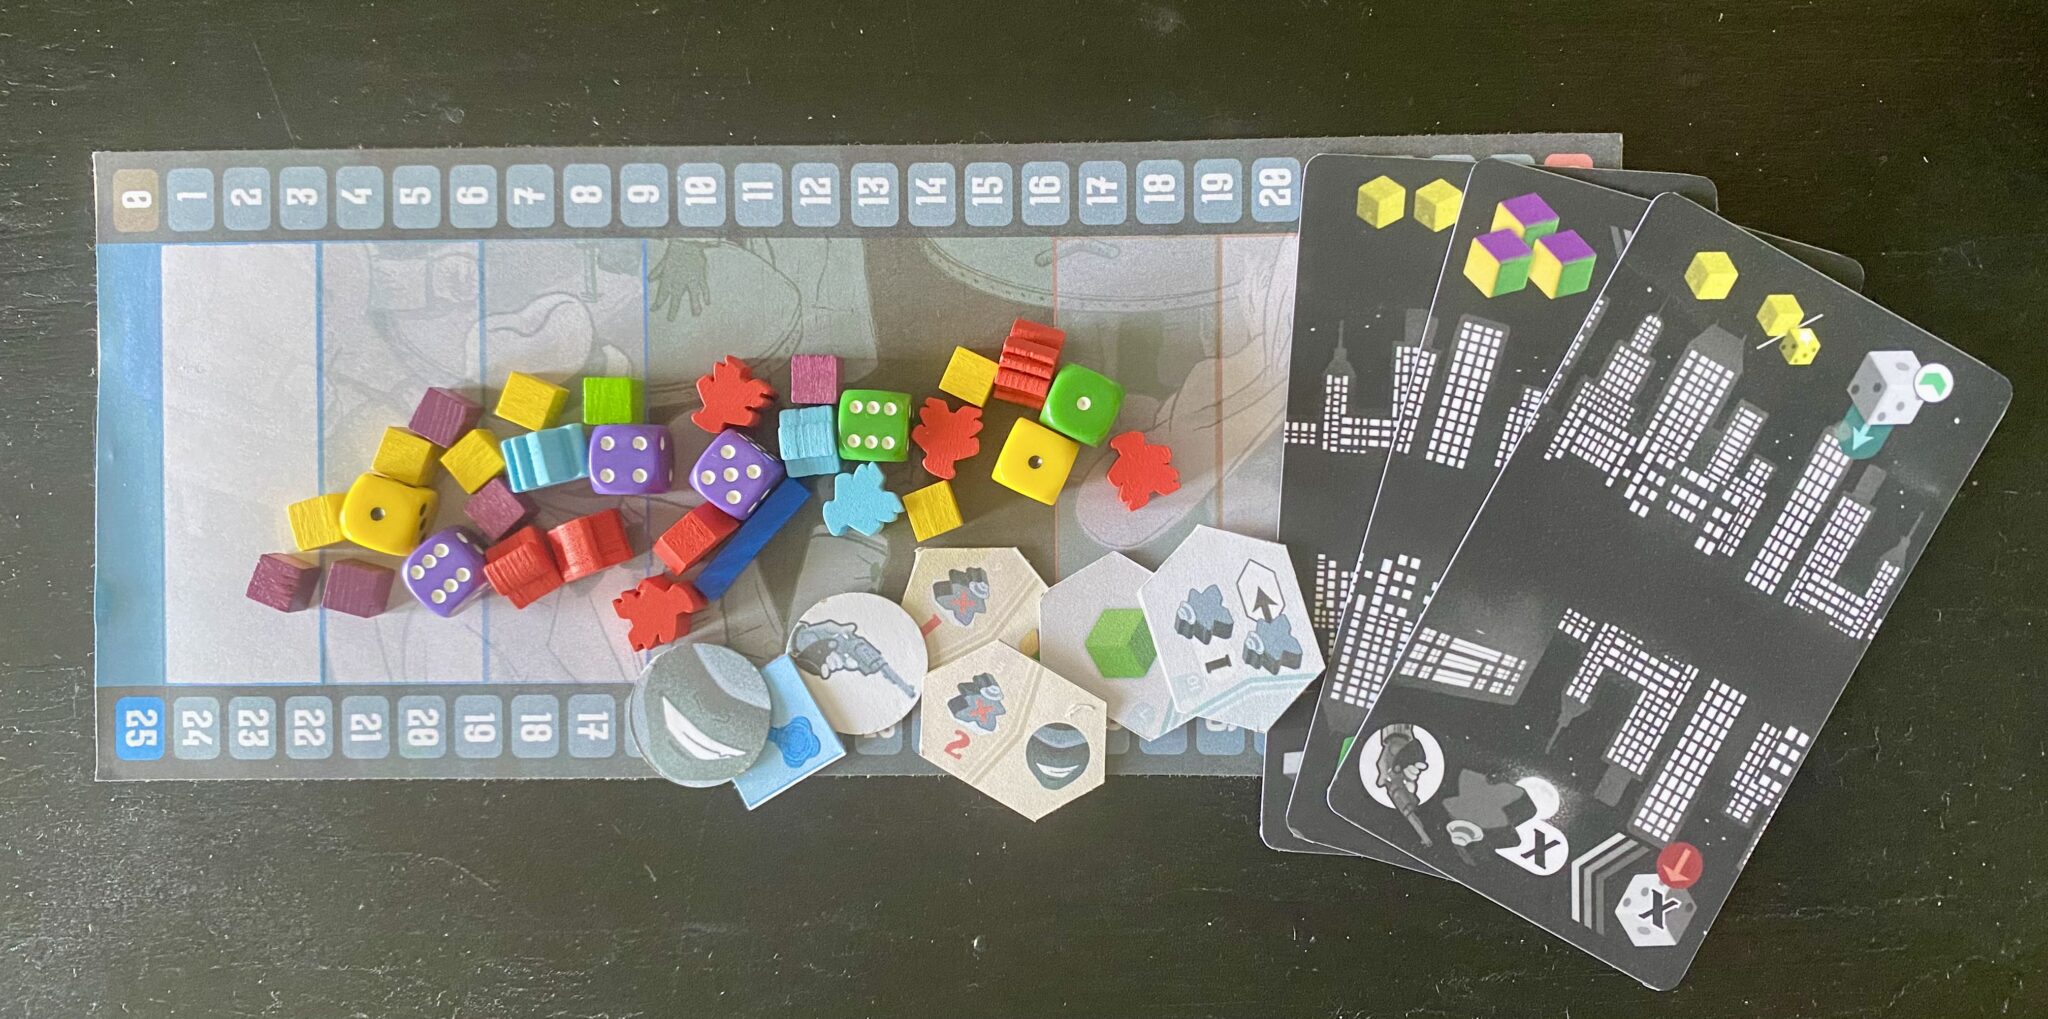 assorted colorful dice and square cubes next to rectangular cards with buildings printed on them, and small pieces from puppets in high places